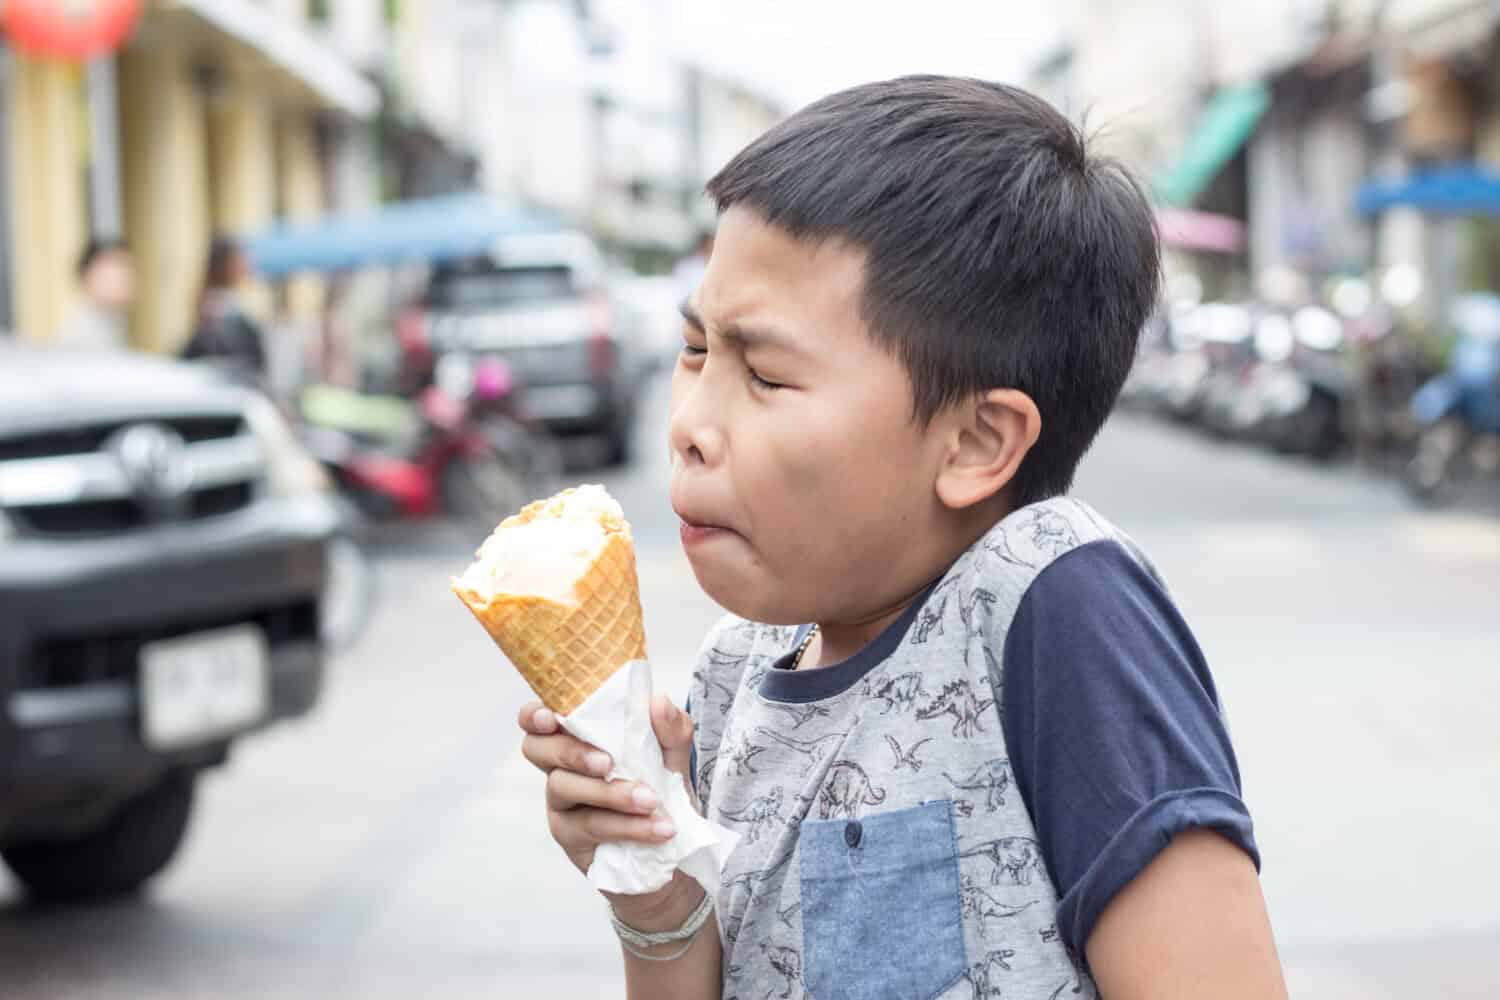 An Asian boy experiences brain freeze due to ice cream cone.